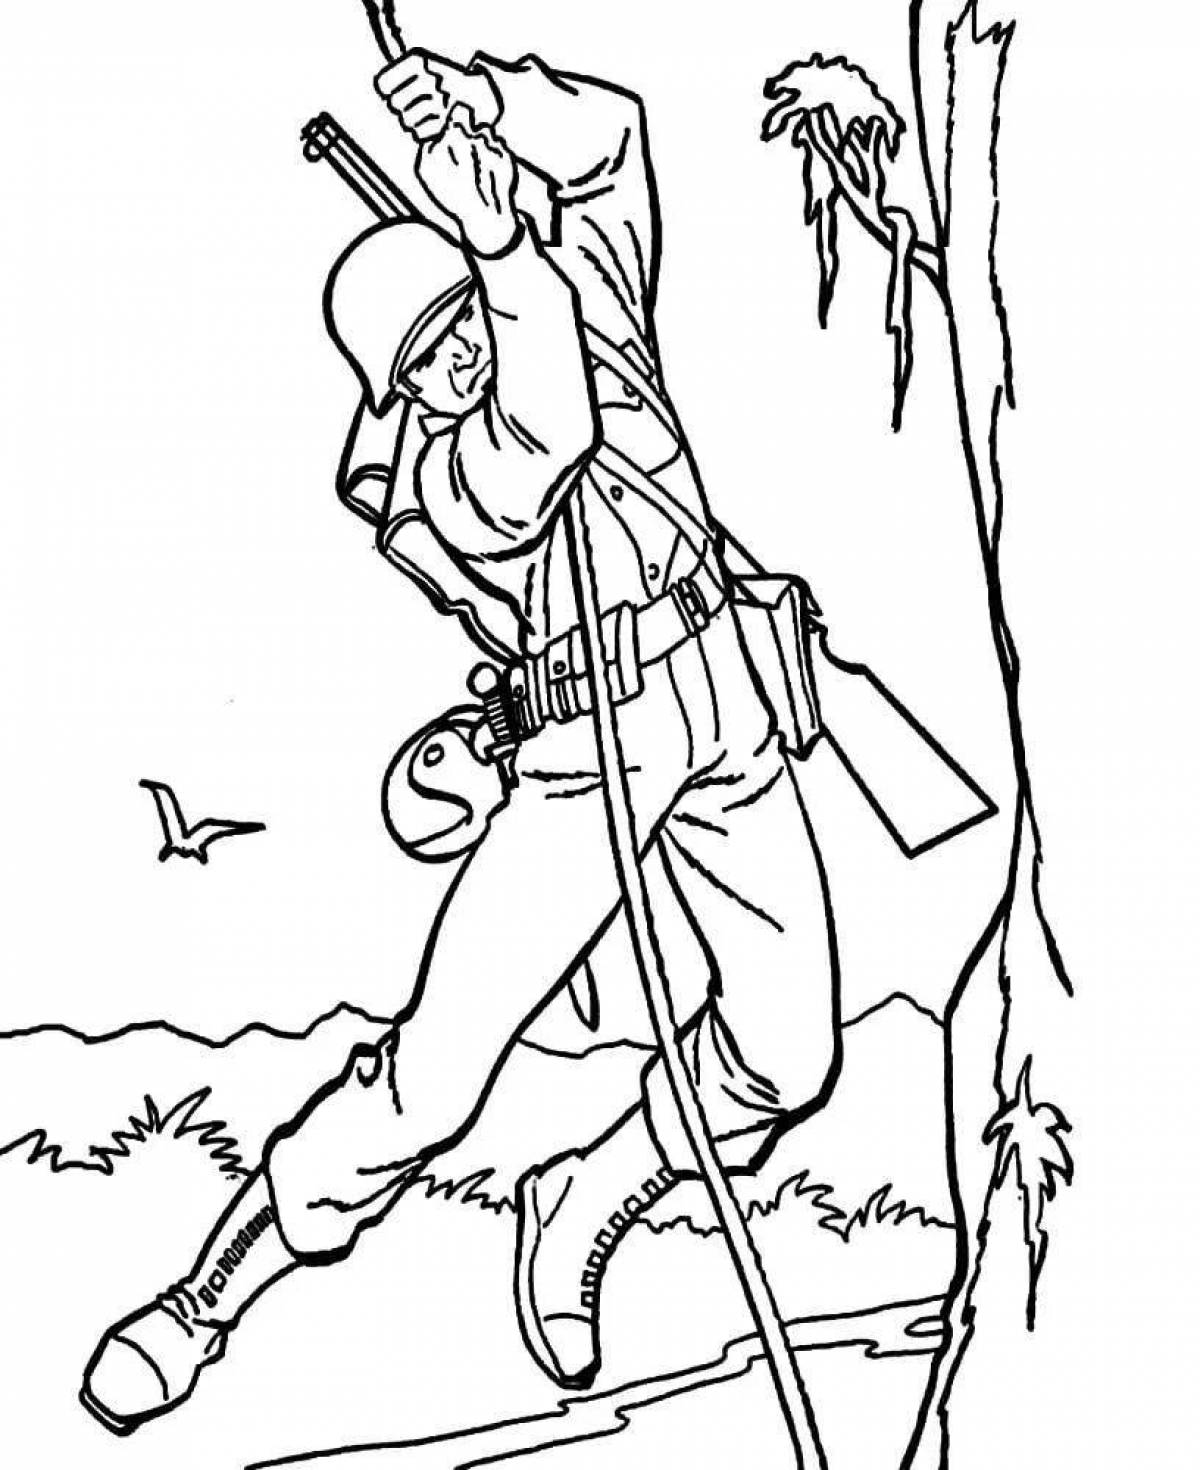 Glorious soldier front coloring page